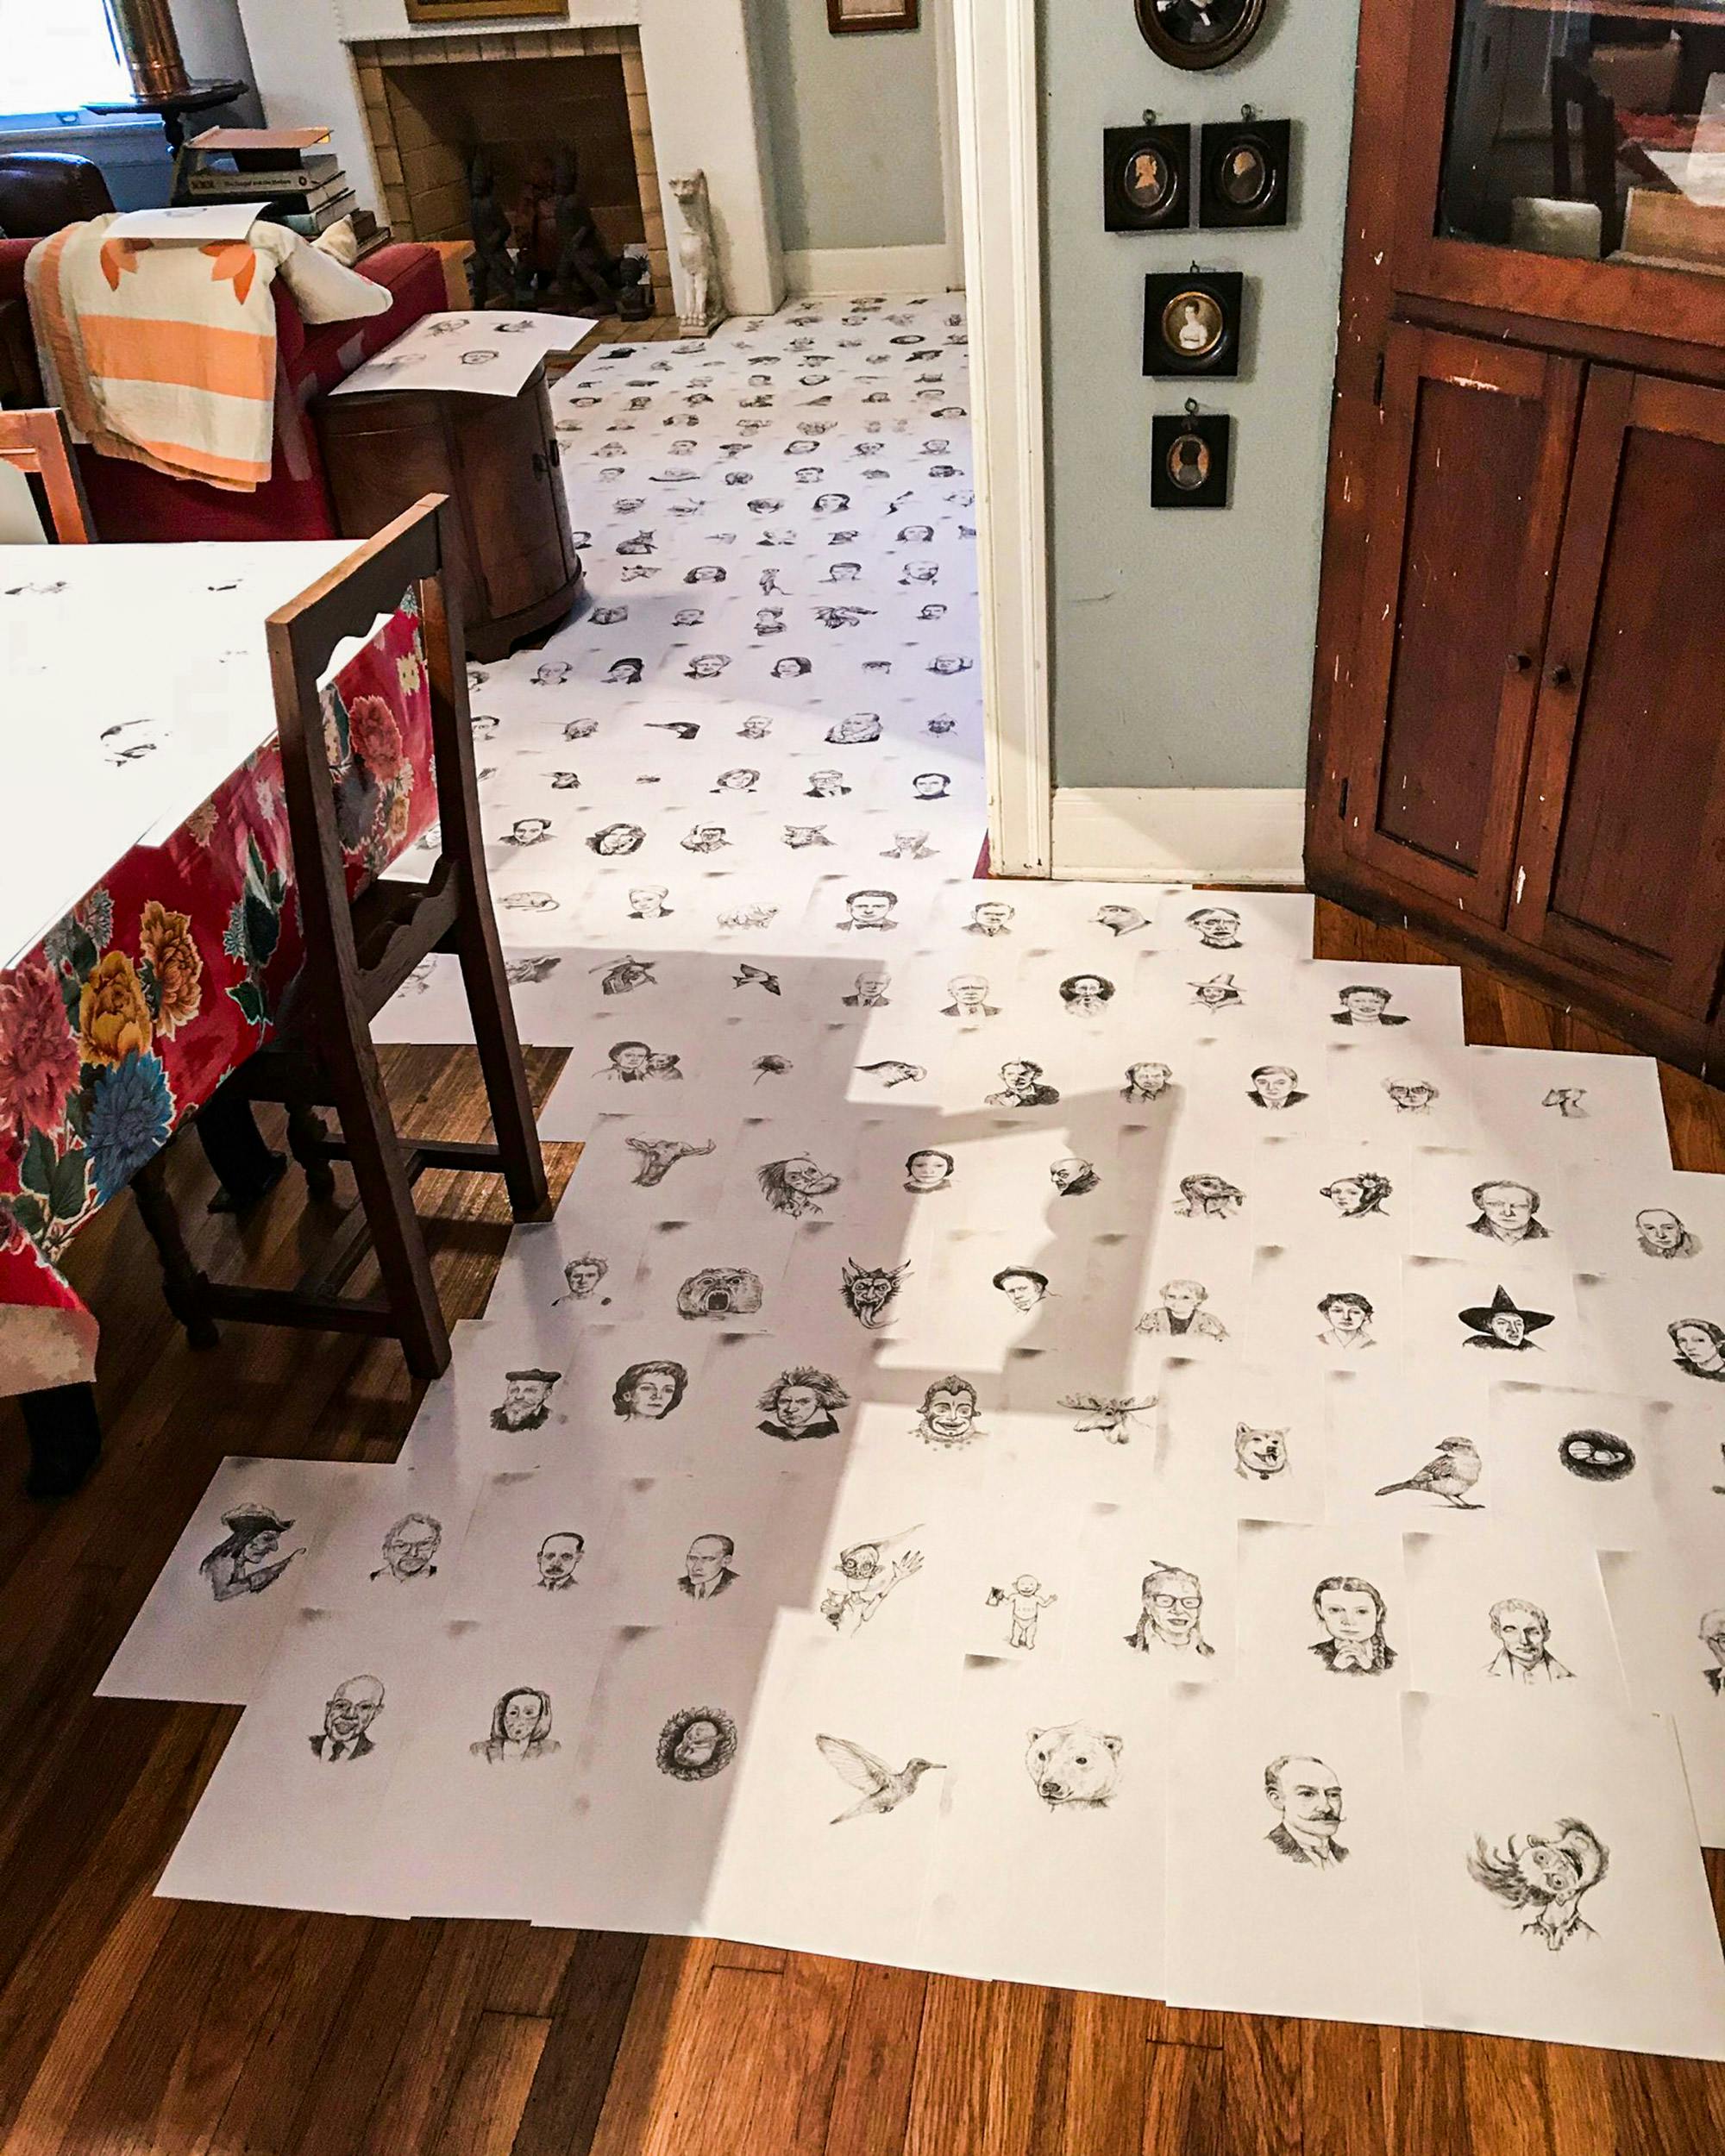 A collection of Edward Carey sketches laid out on his wood floor. 